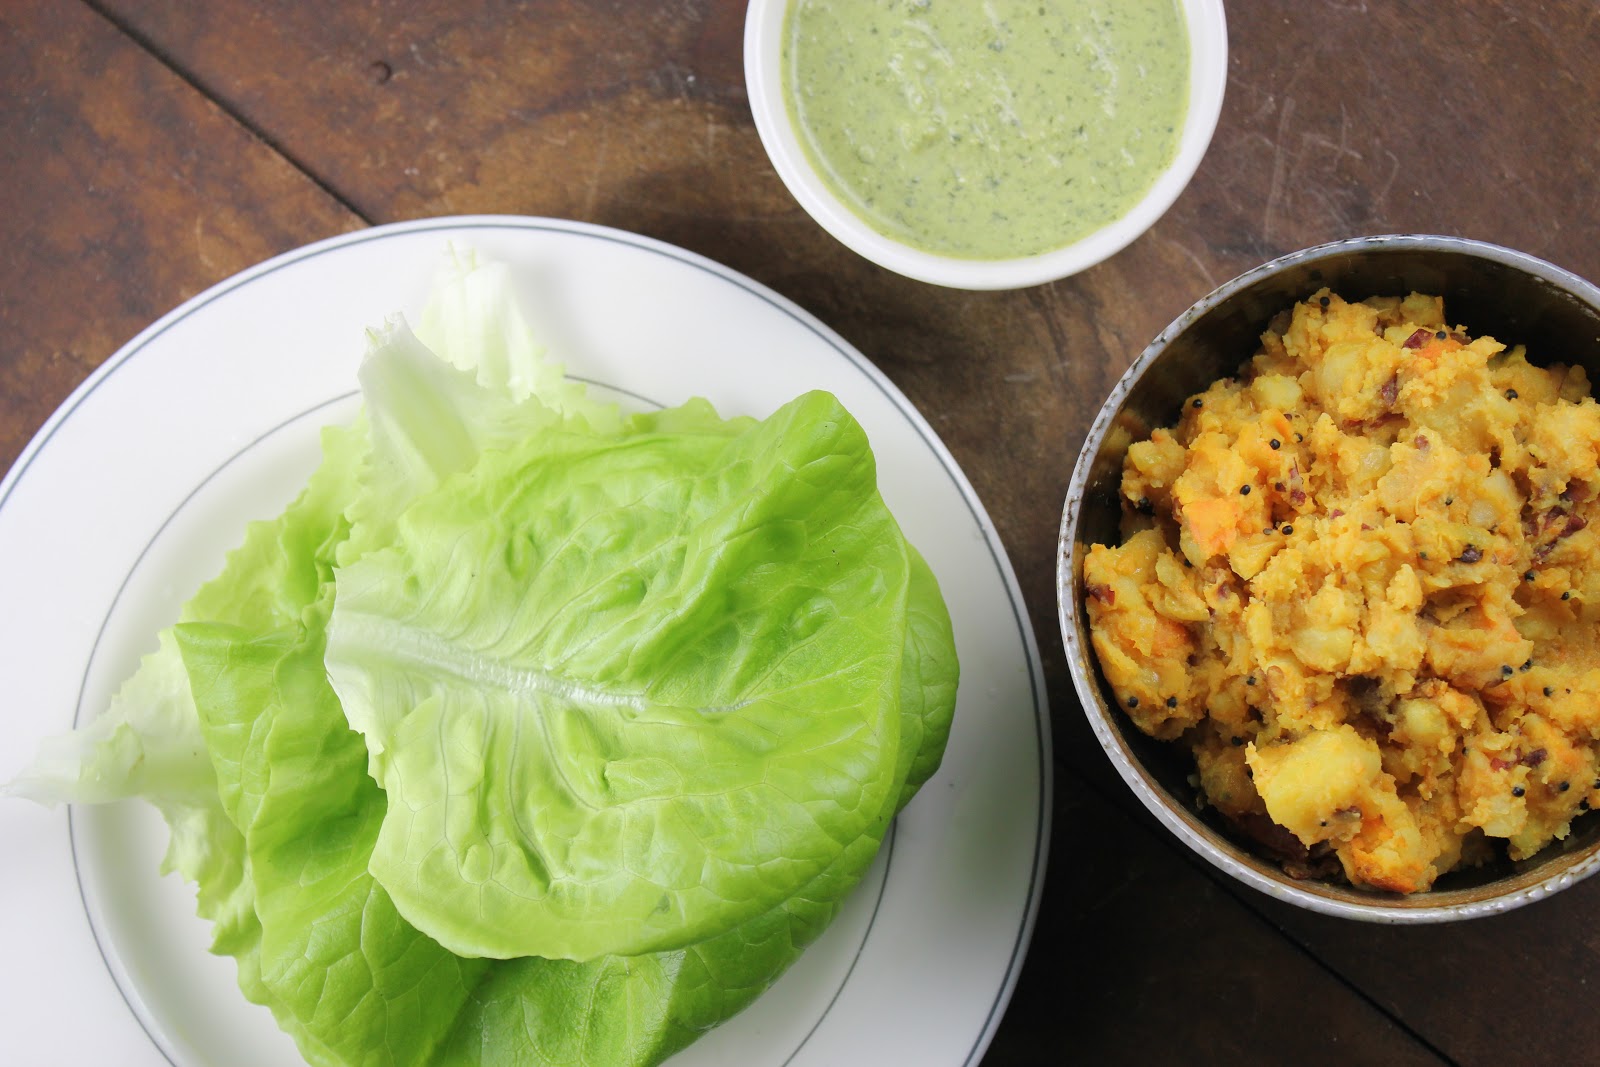 butter lettuce, potato curry and coconut chutney